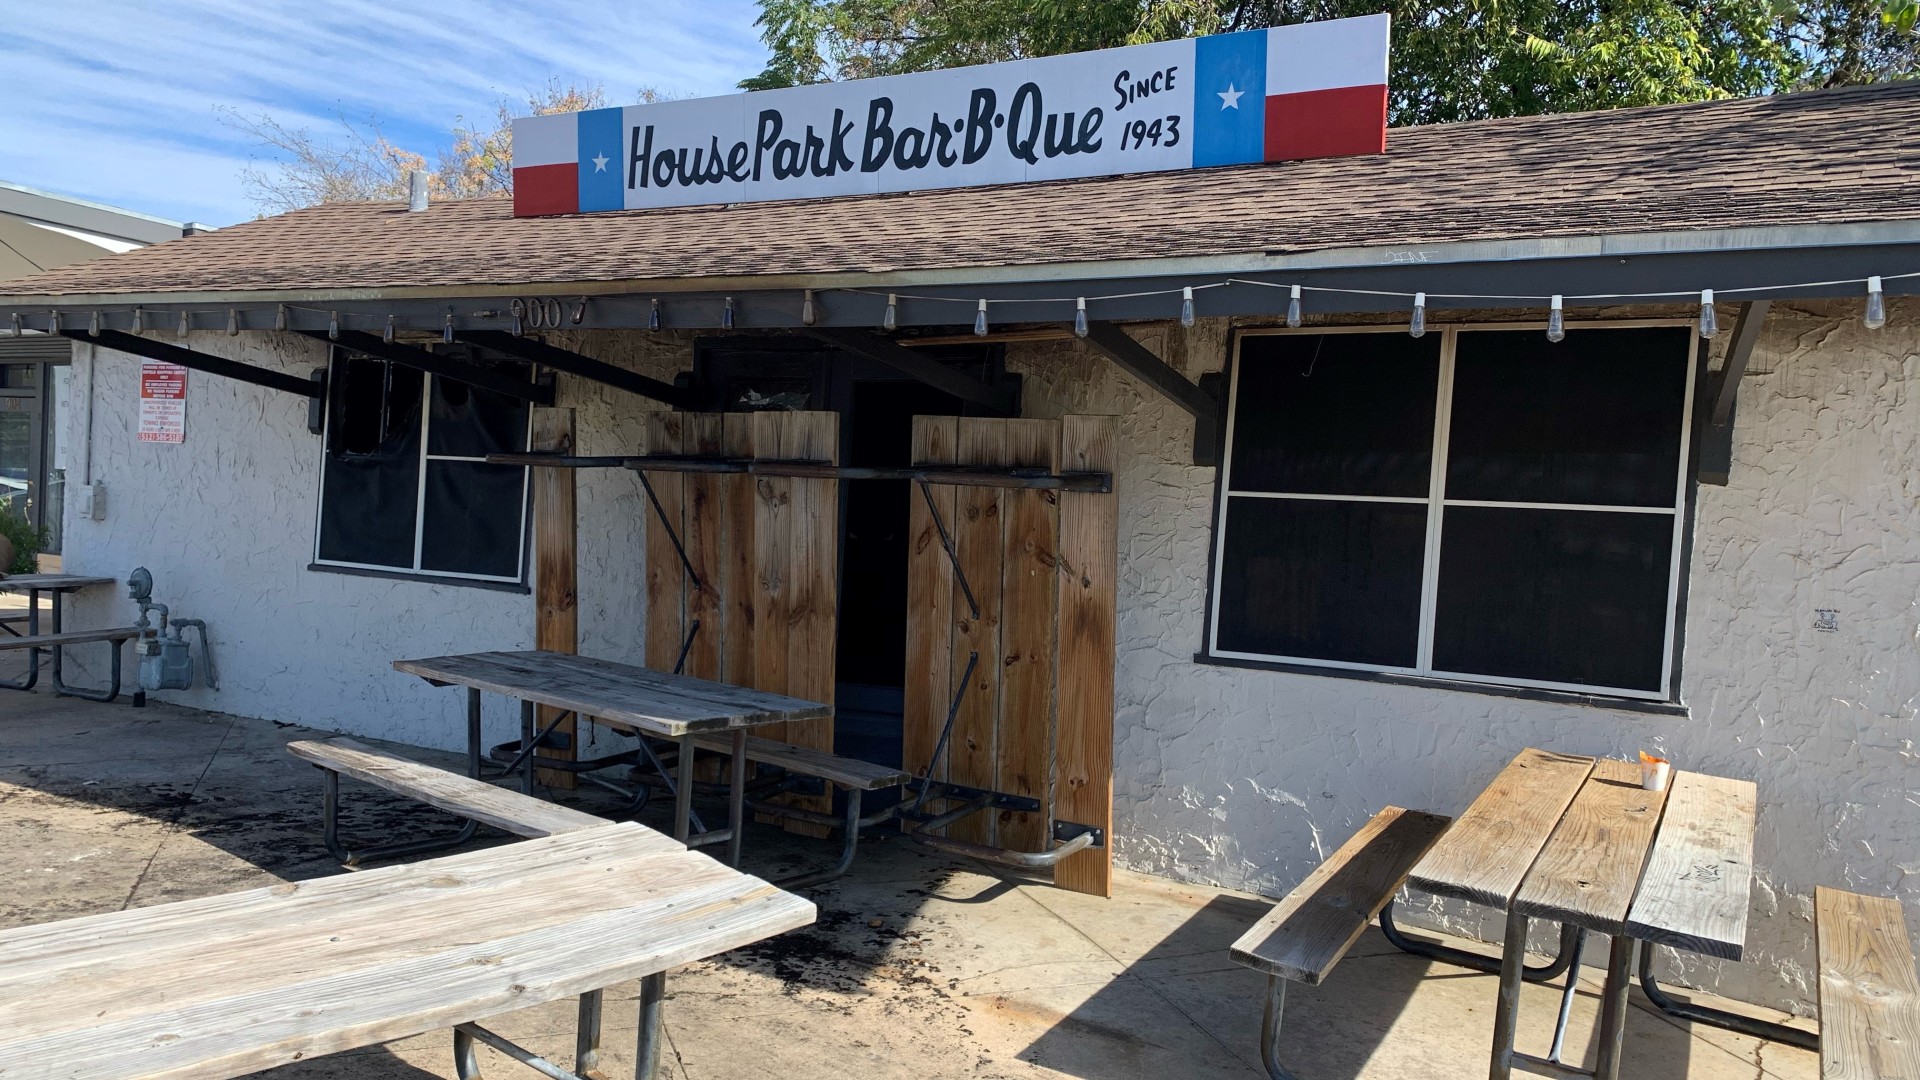 An entrance to House Park Bar-B-Que in Austin, Texas, is boarded up in this image from December 1, 2020. (John Pope/Spectrum News 1)